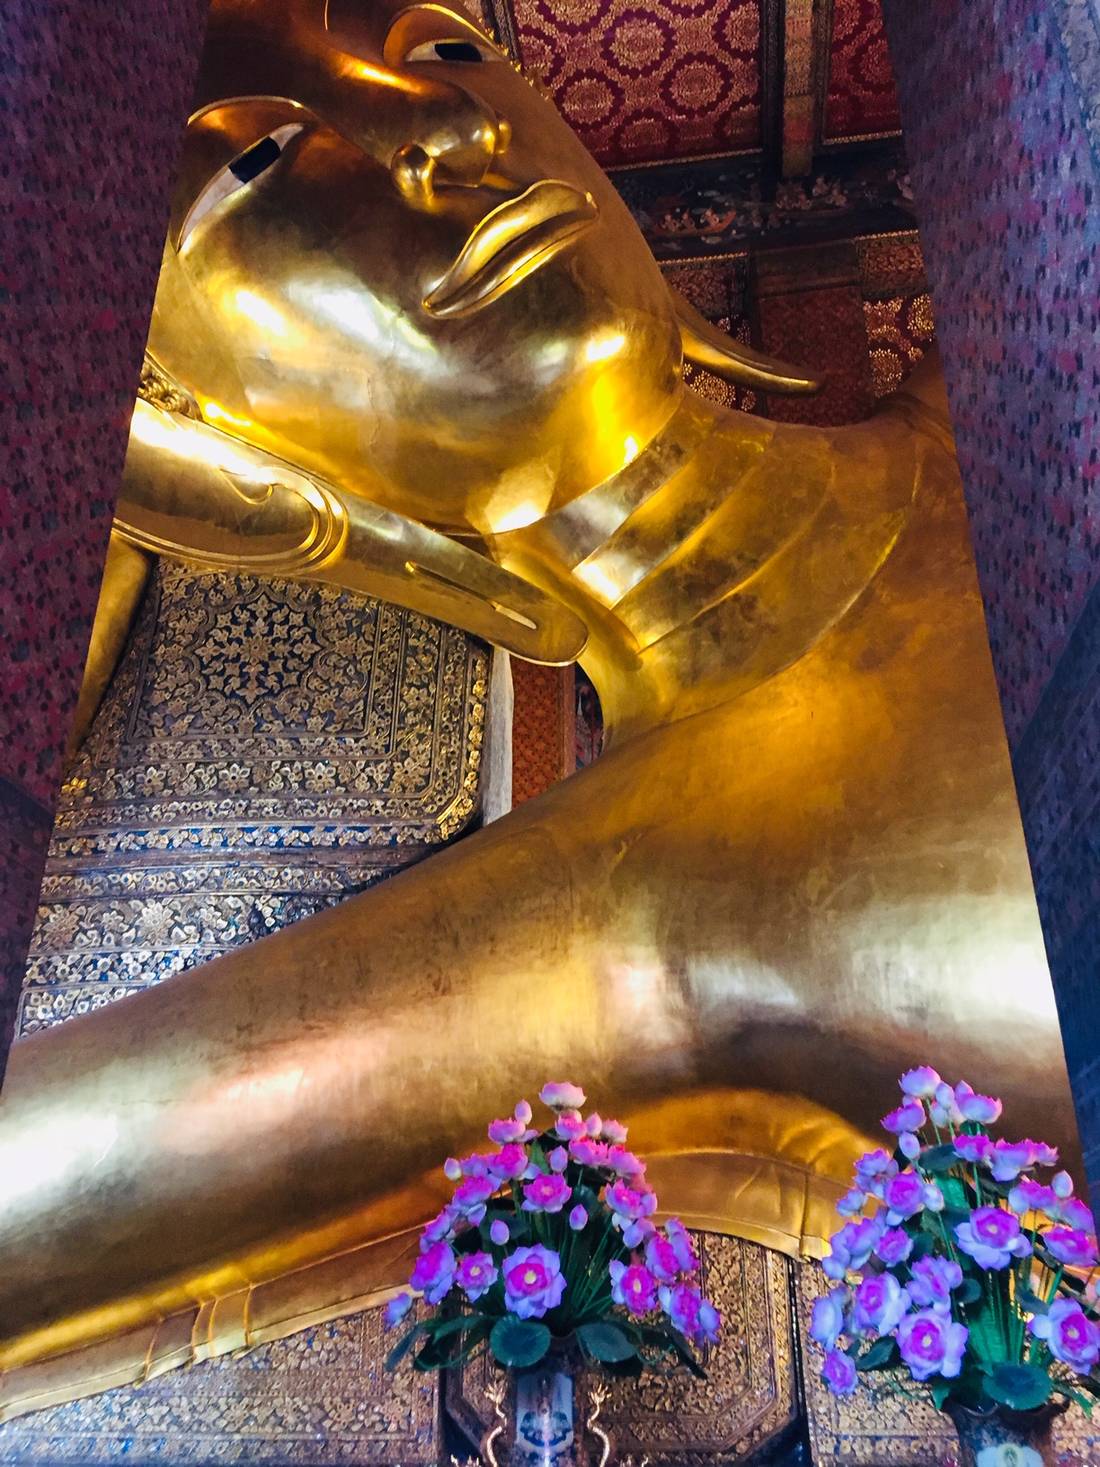 The 46 meters long, huge golden Buddha - the main attraction in Wat Pho